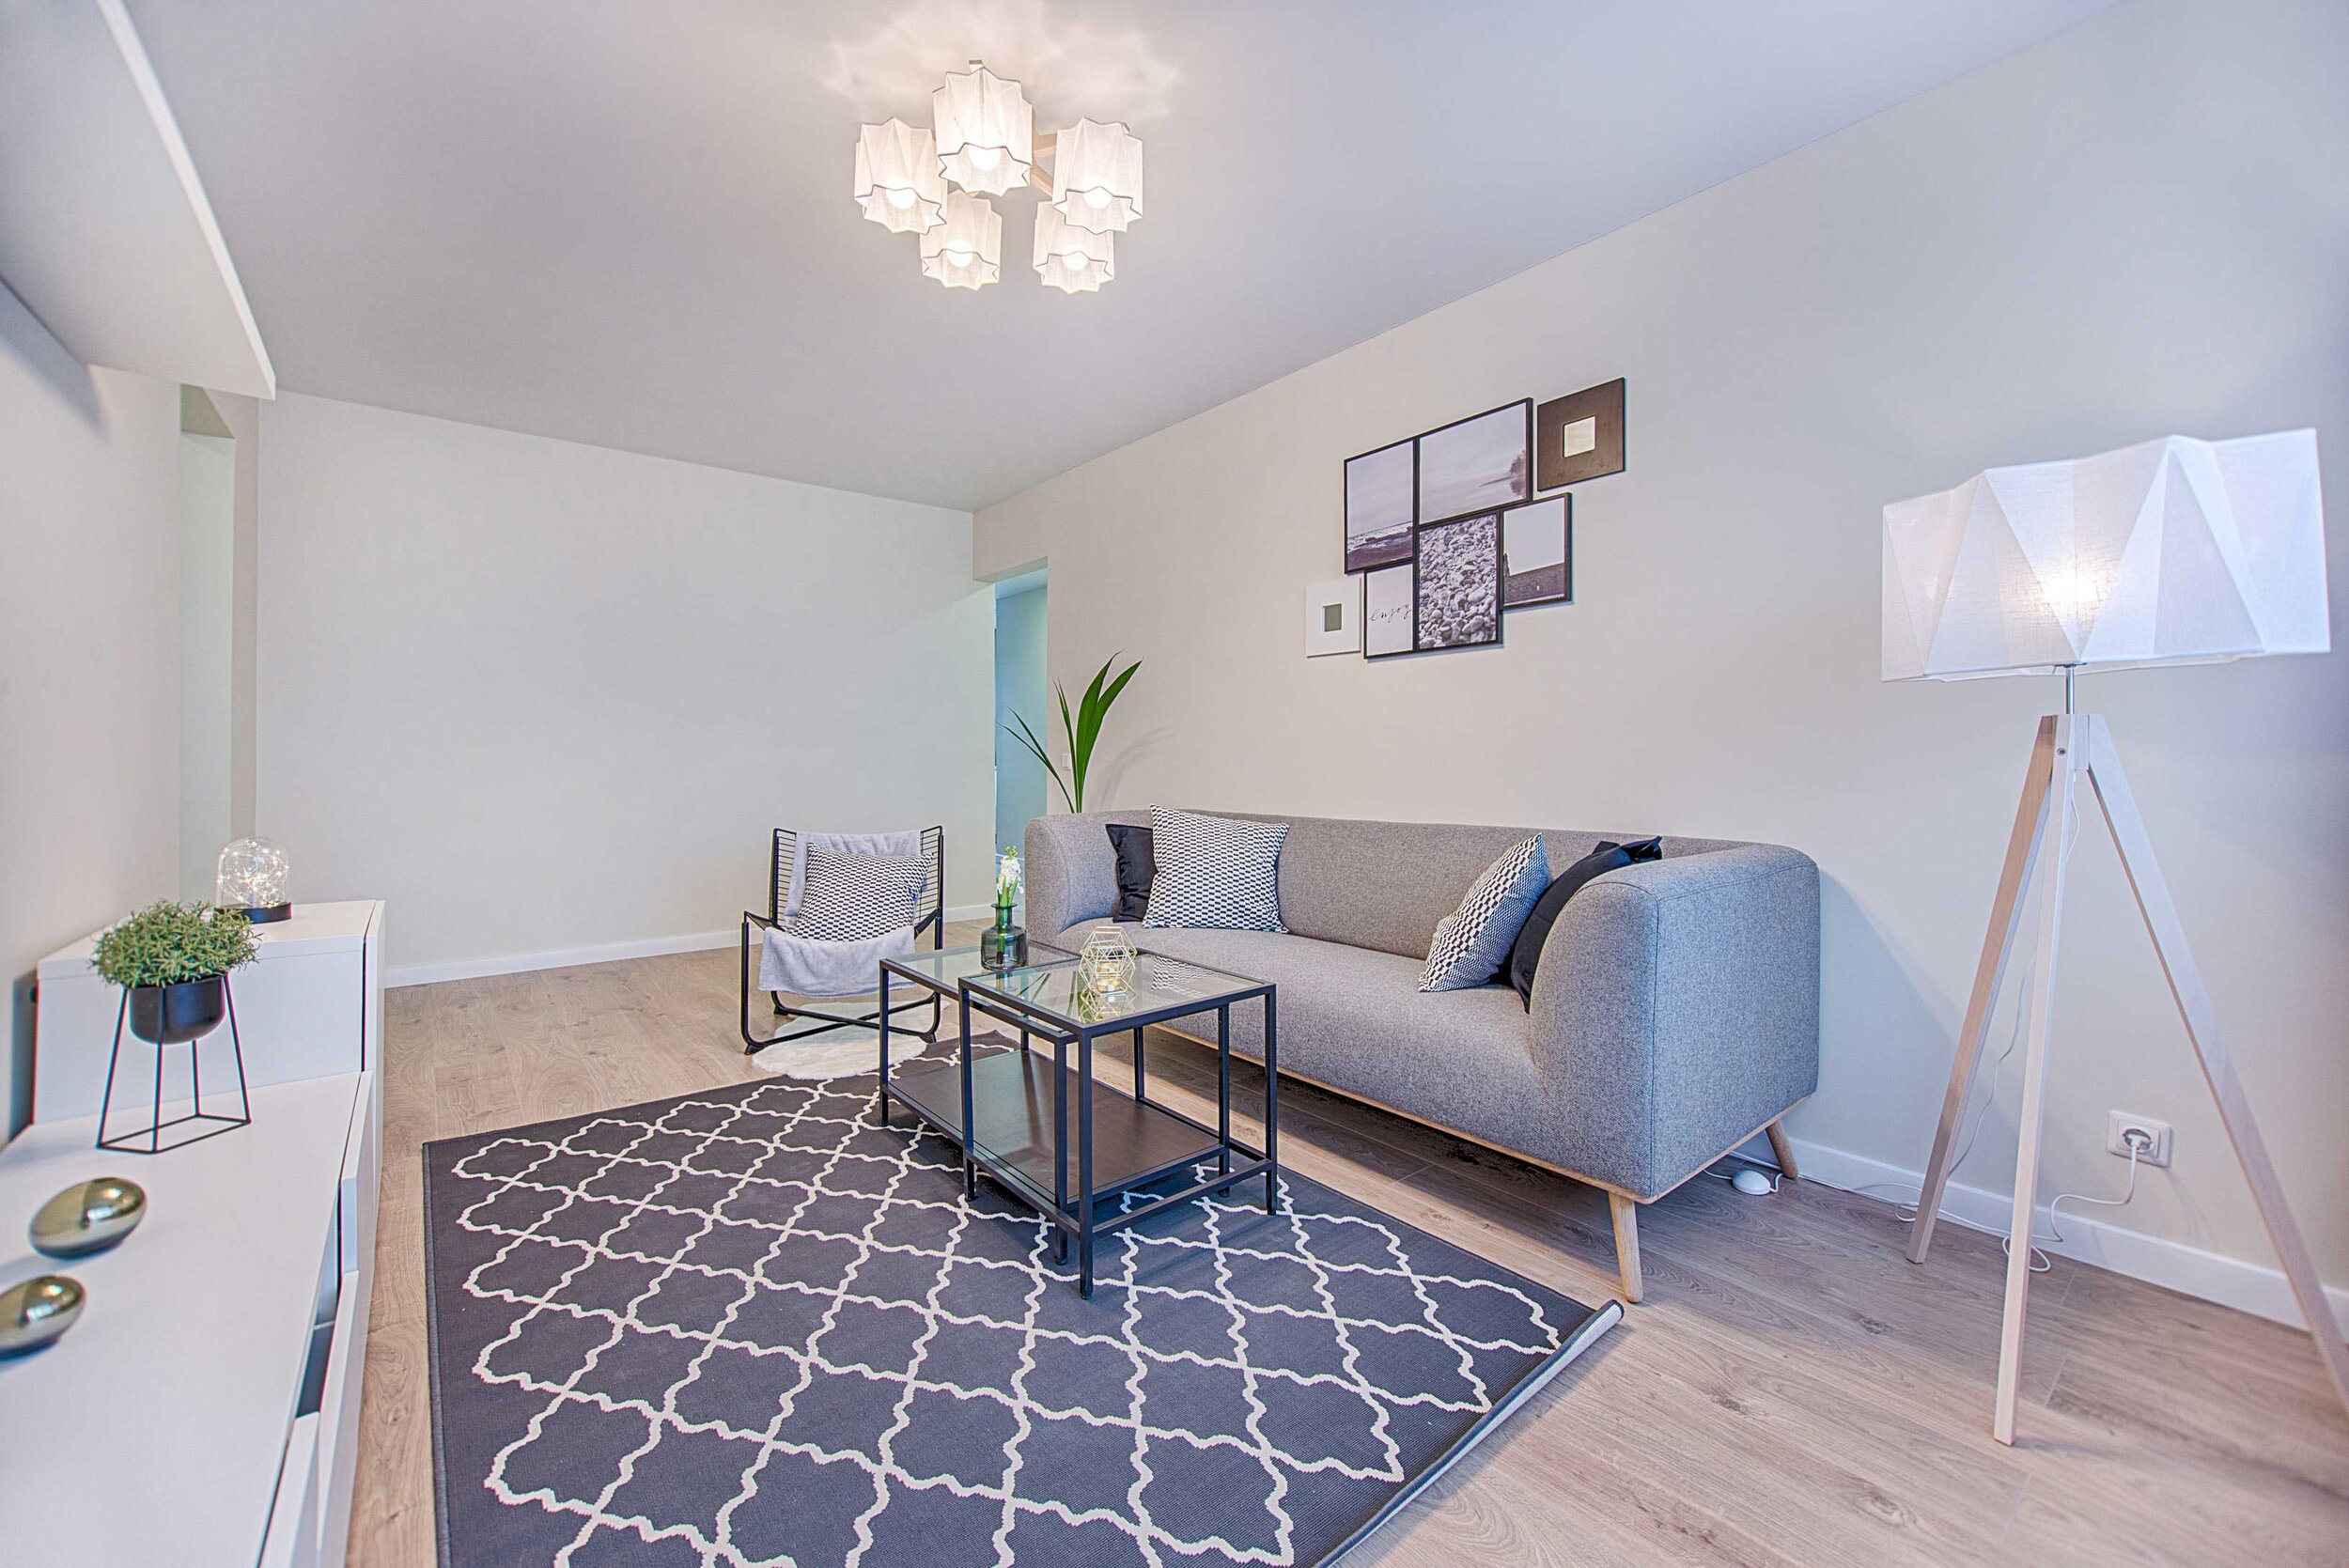 399 Imperial Way, #312, Daly City | $2,400/Mo